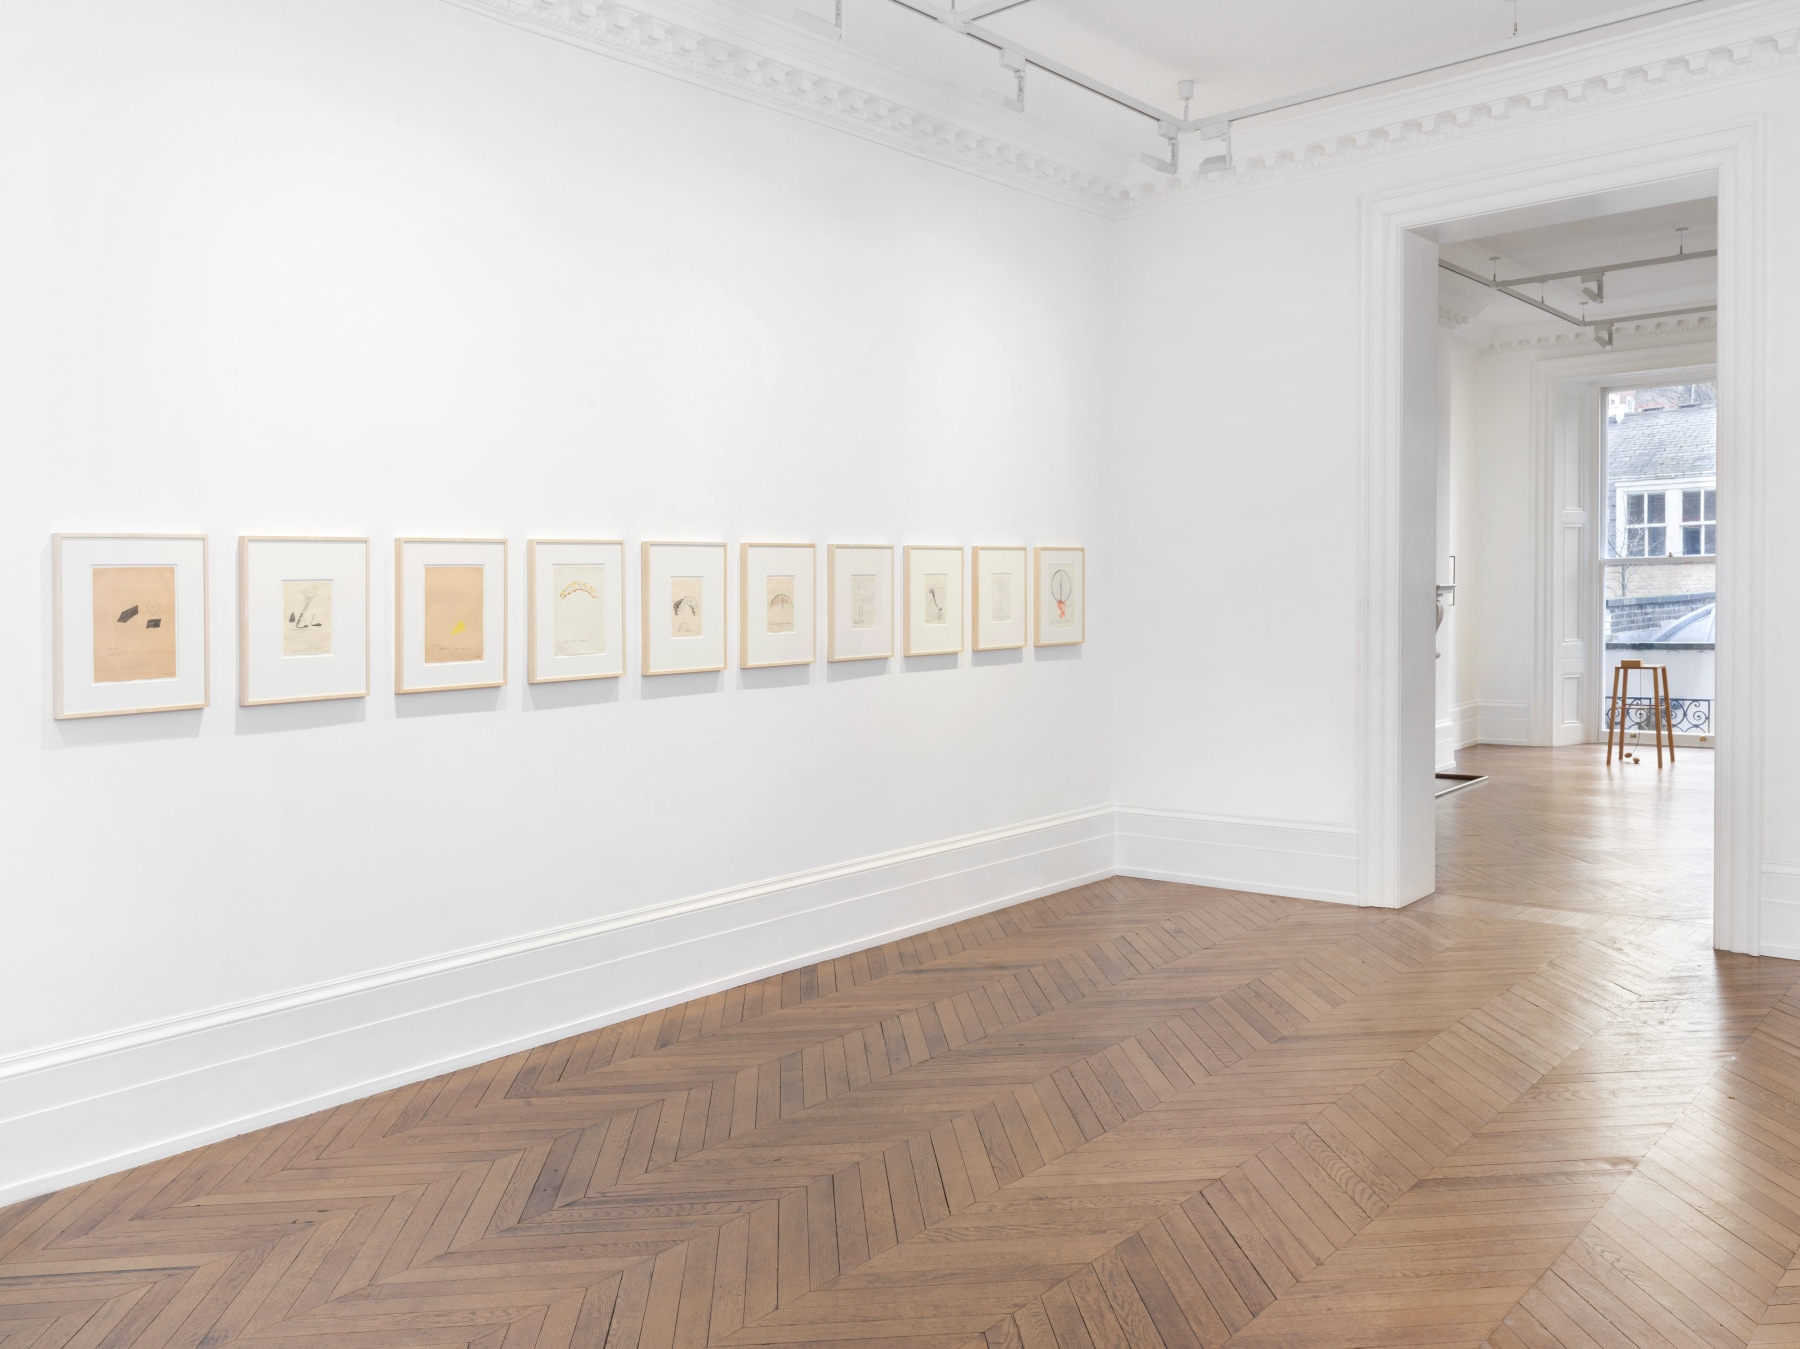 Sigmar Polke, Objects: Real and Imagined, London, 2020, Installation Image 1